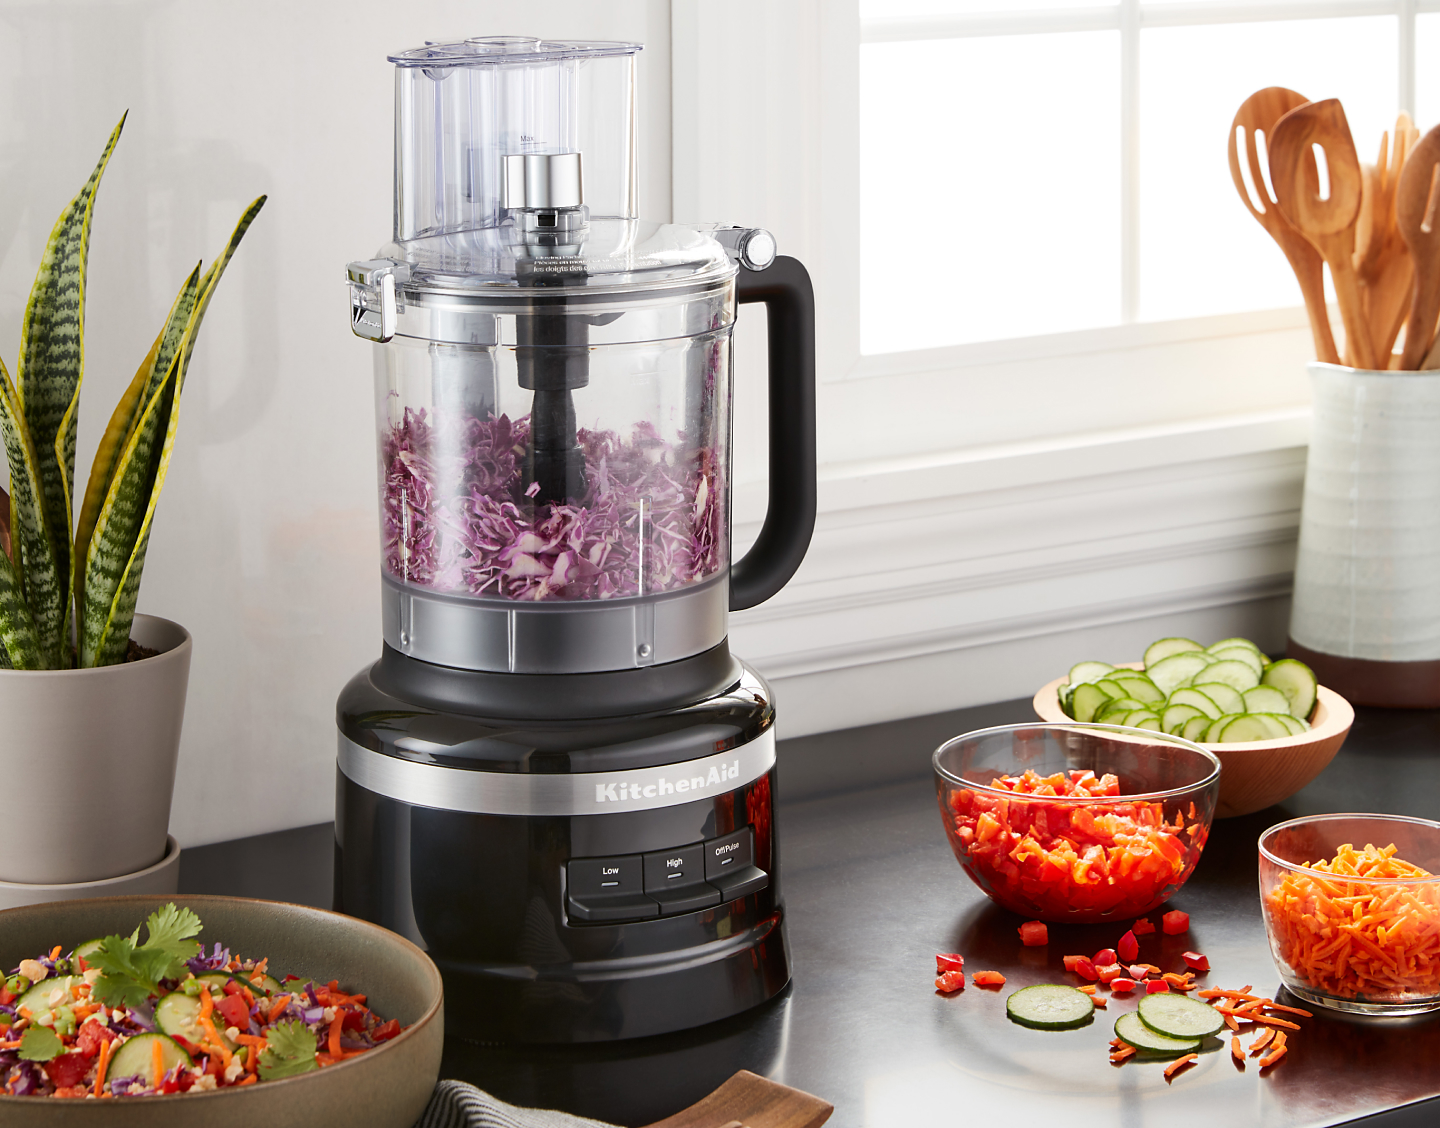 https://kitchenaid-h.assetsadobe.com/is/image/content/dam/business-unit/kitchenaid/en-us/marketing-content/site-assets/page-content/blog/how-to-shred-cabbage-in-a-food-processor/How-to-Shred-Cabbage-in-a-Food-Processor-H2-5.jpg?fmt=png-alpha&qlt=85,0&resMode=sharp2&op_usm=1.75,0.3,2,0&scl=1&constrain=fit,1